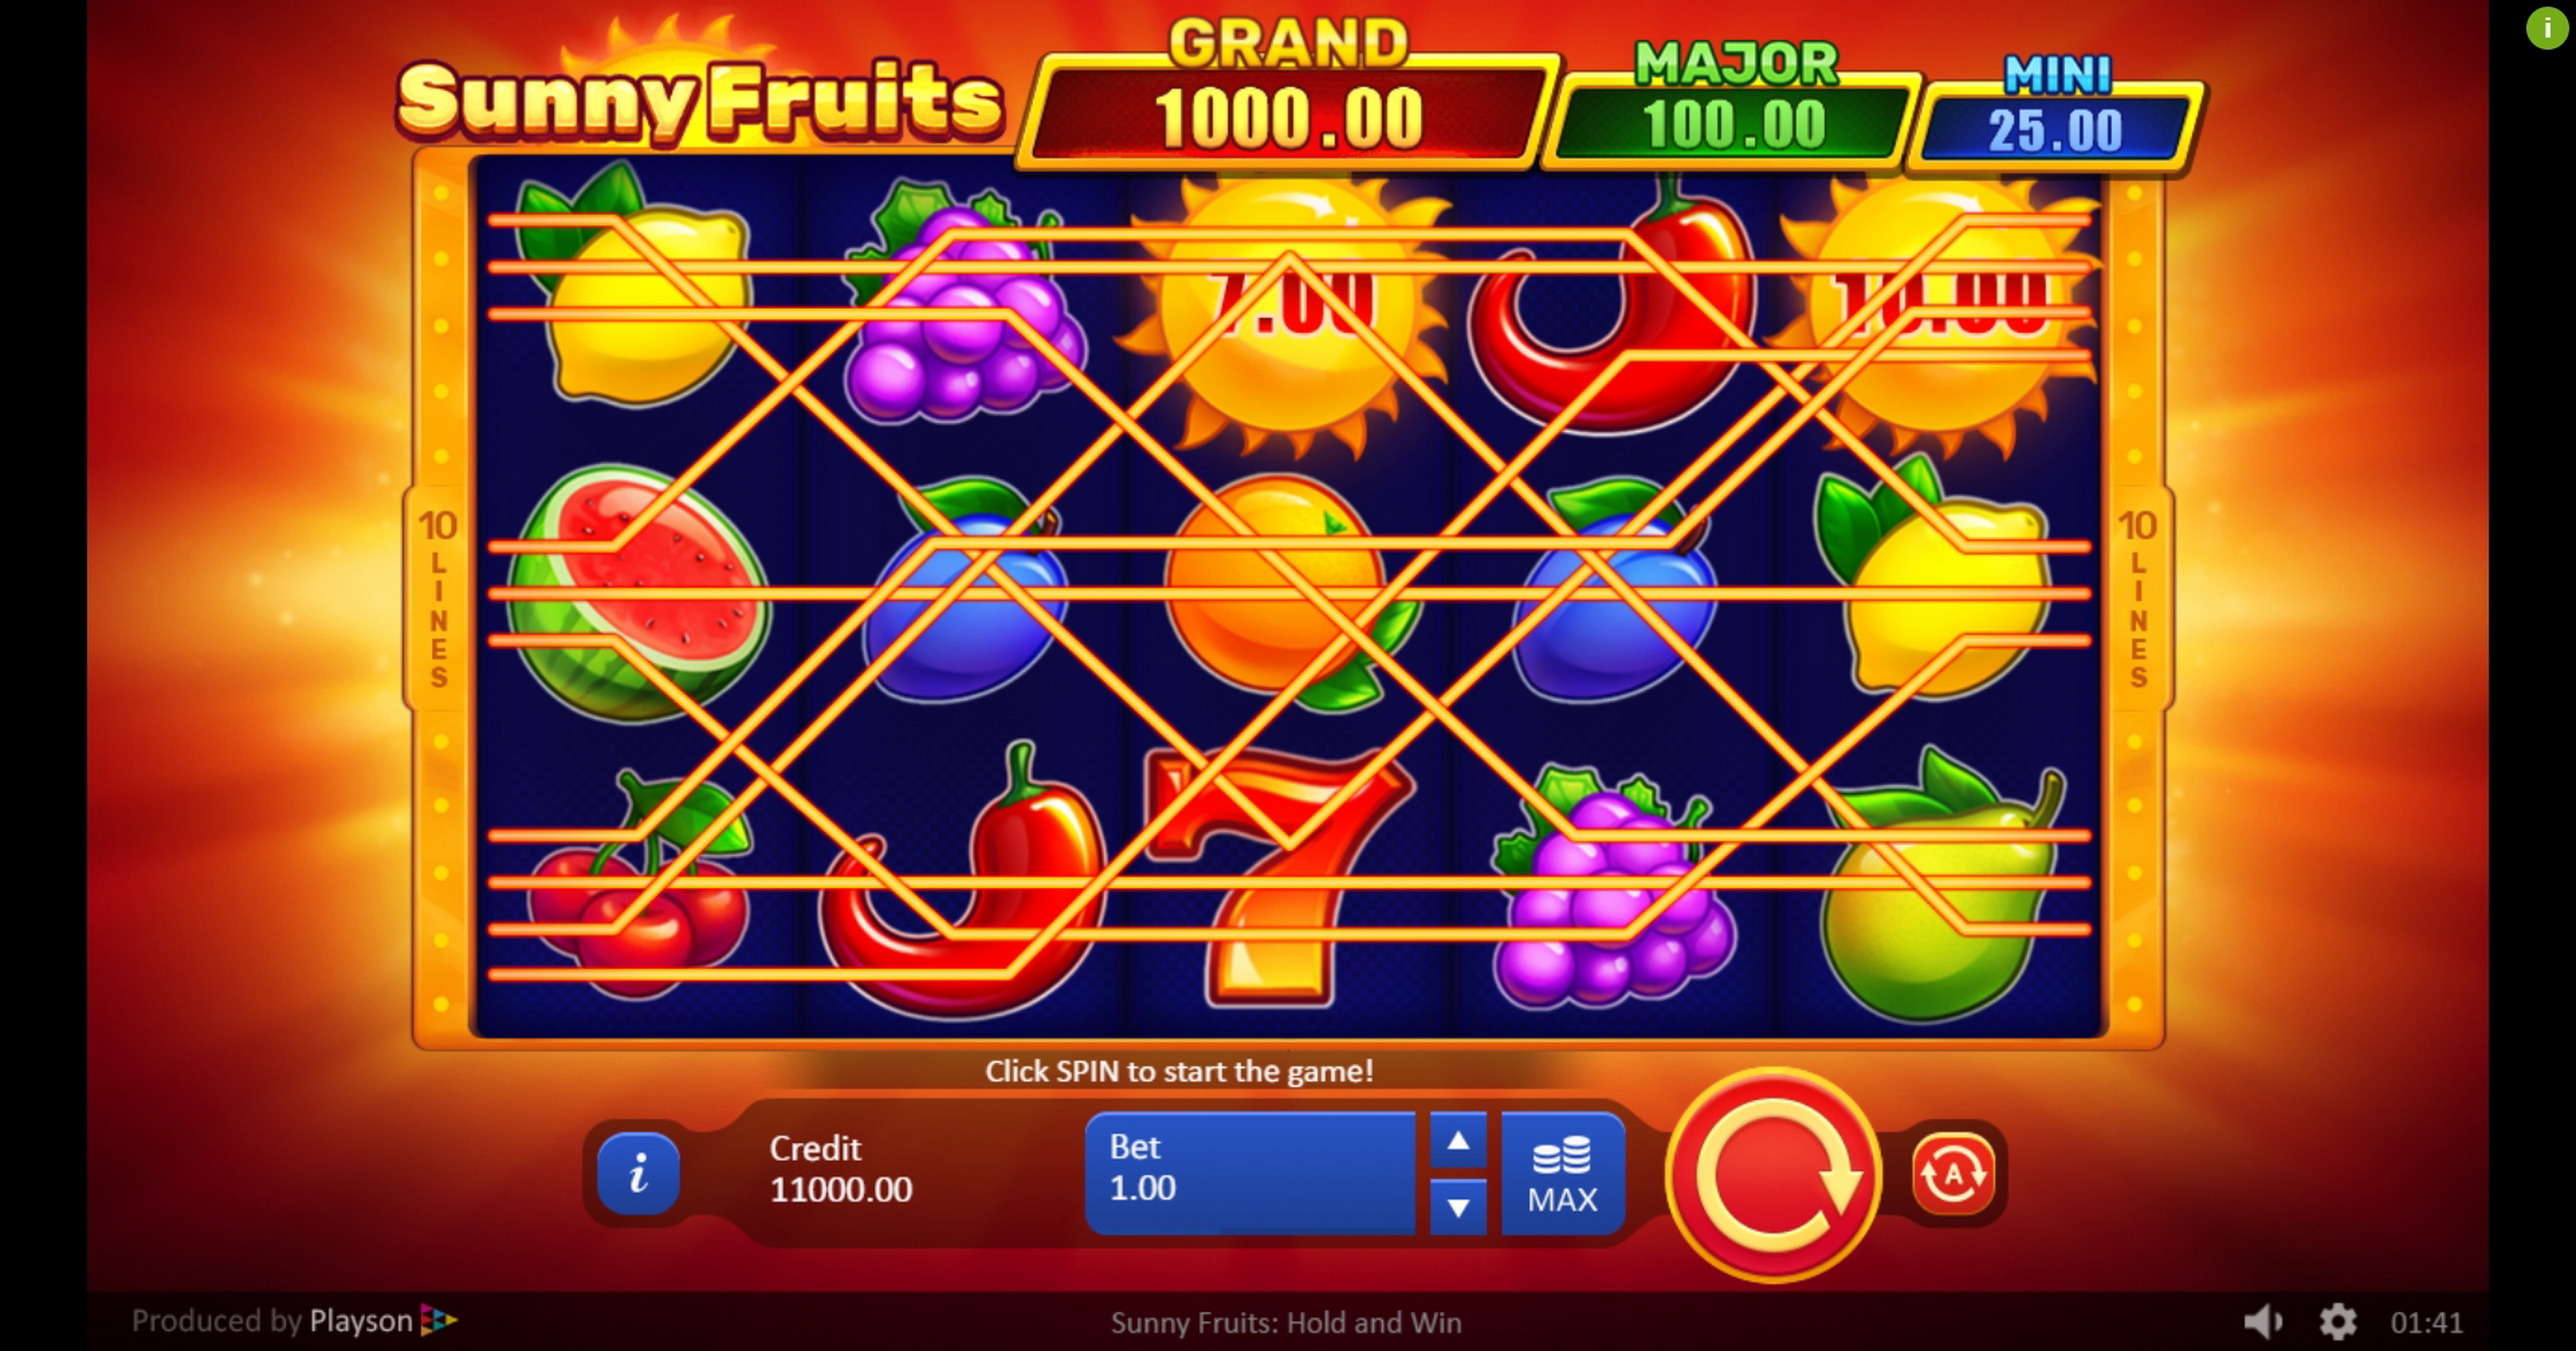 Play Sunny Fruits: Hold and Win Free Casino Slot Game by Playson